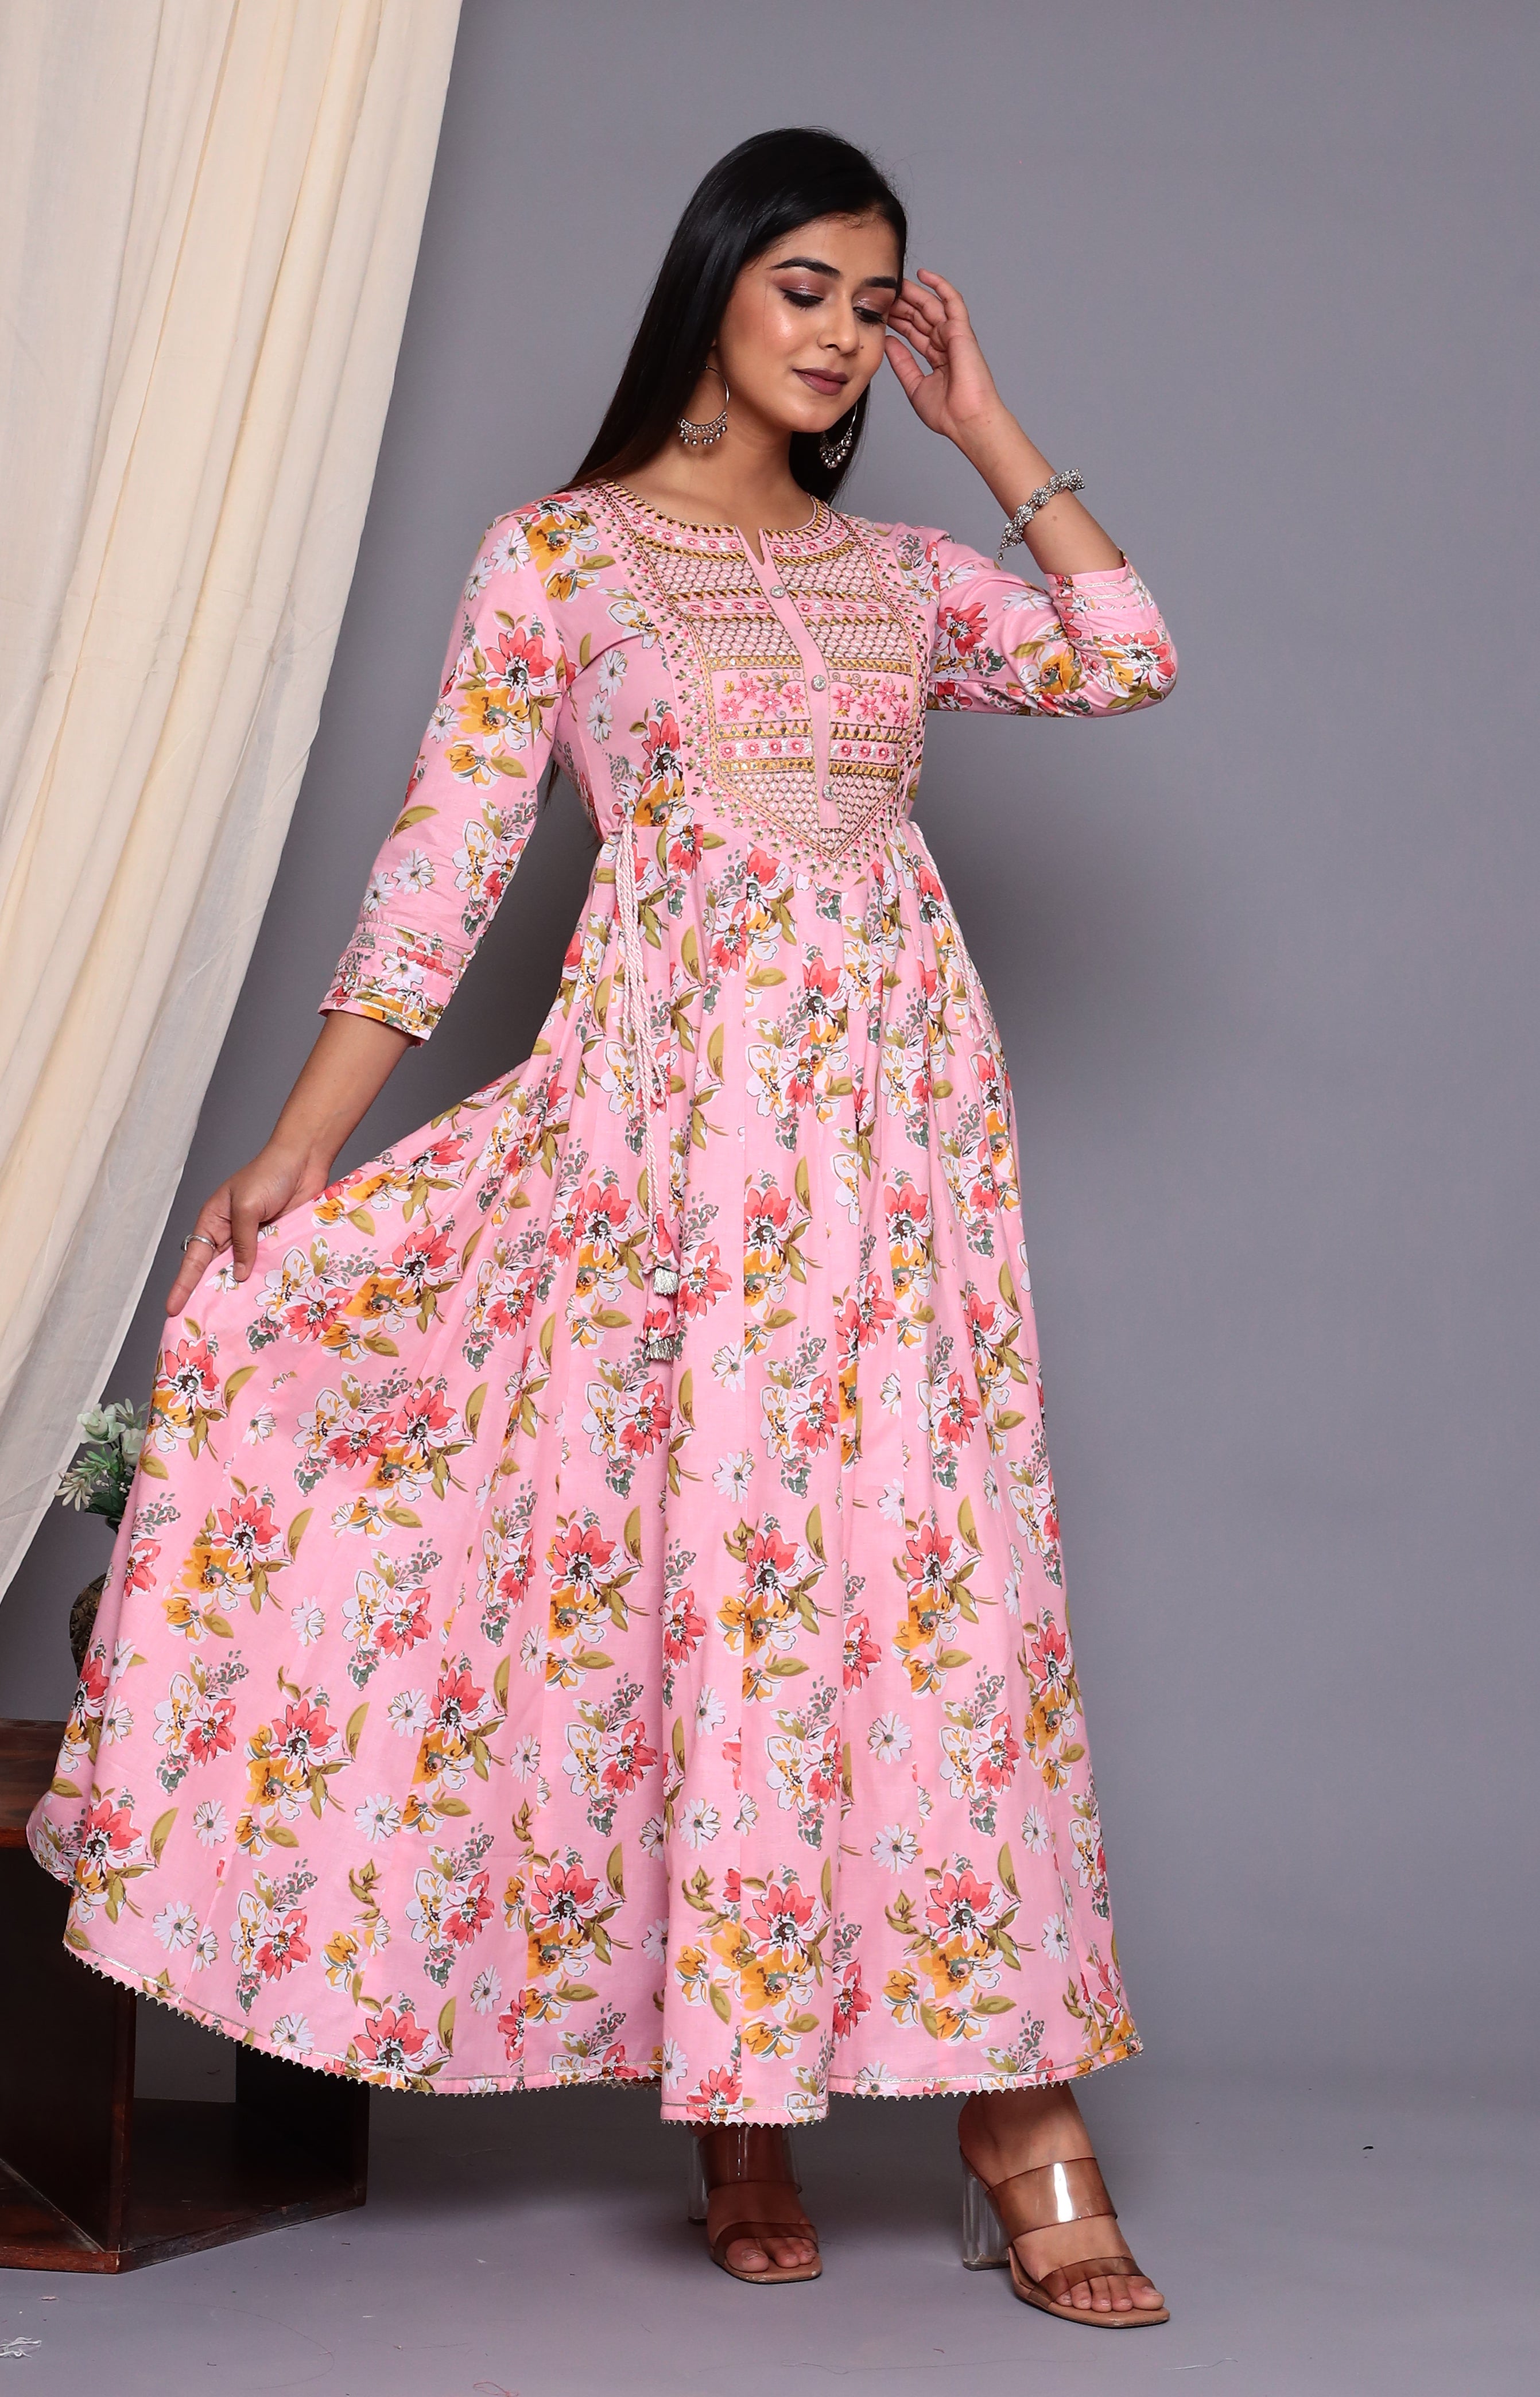 Women's Embroideried Pink Flared Gown